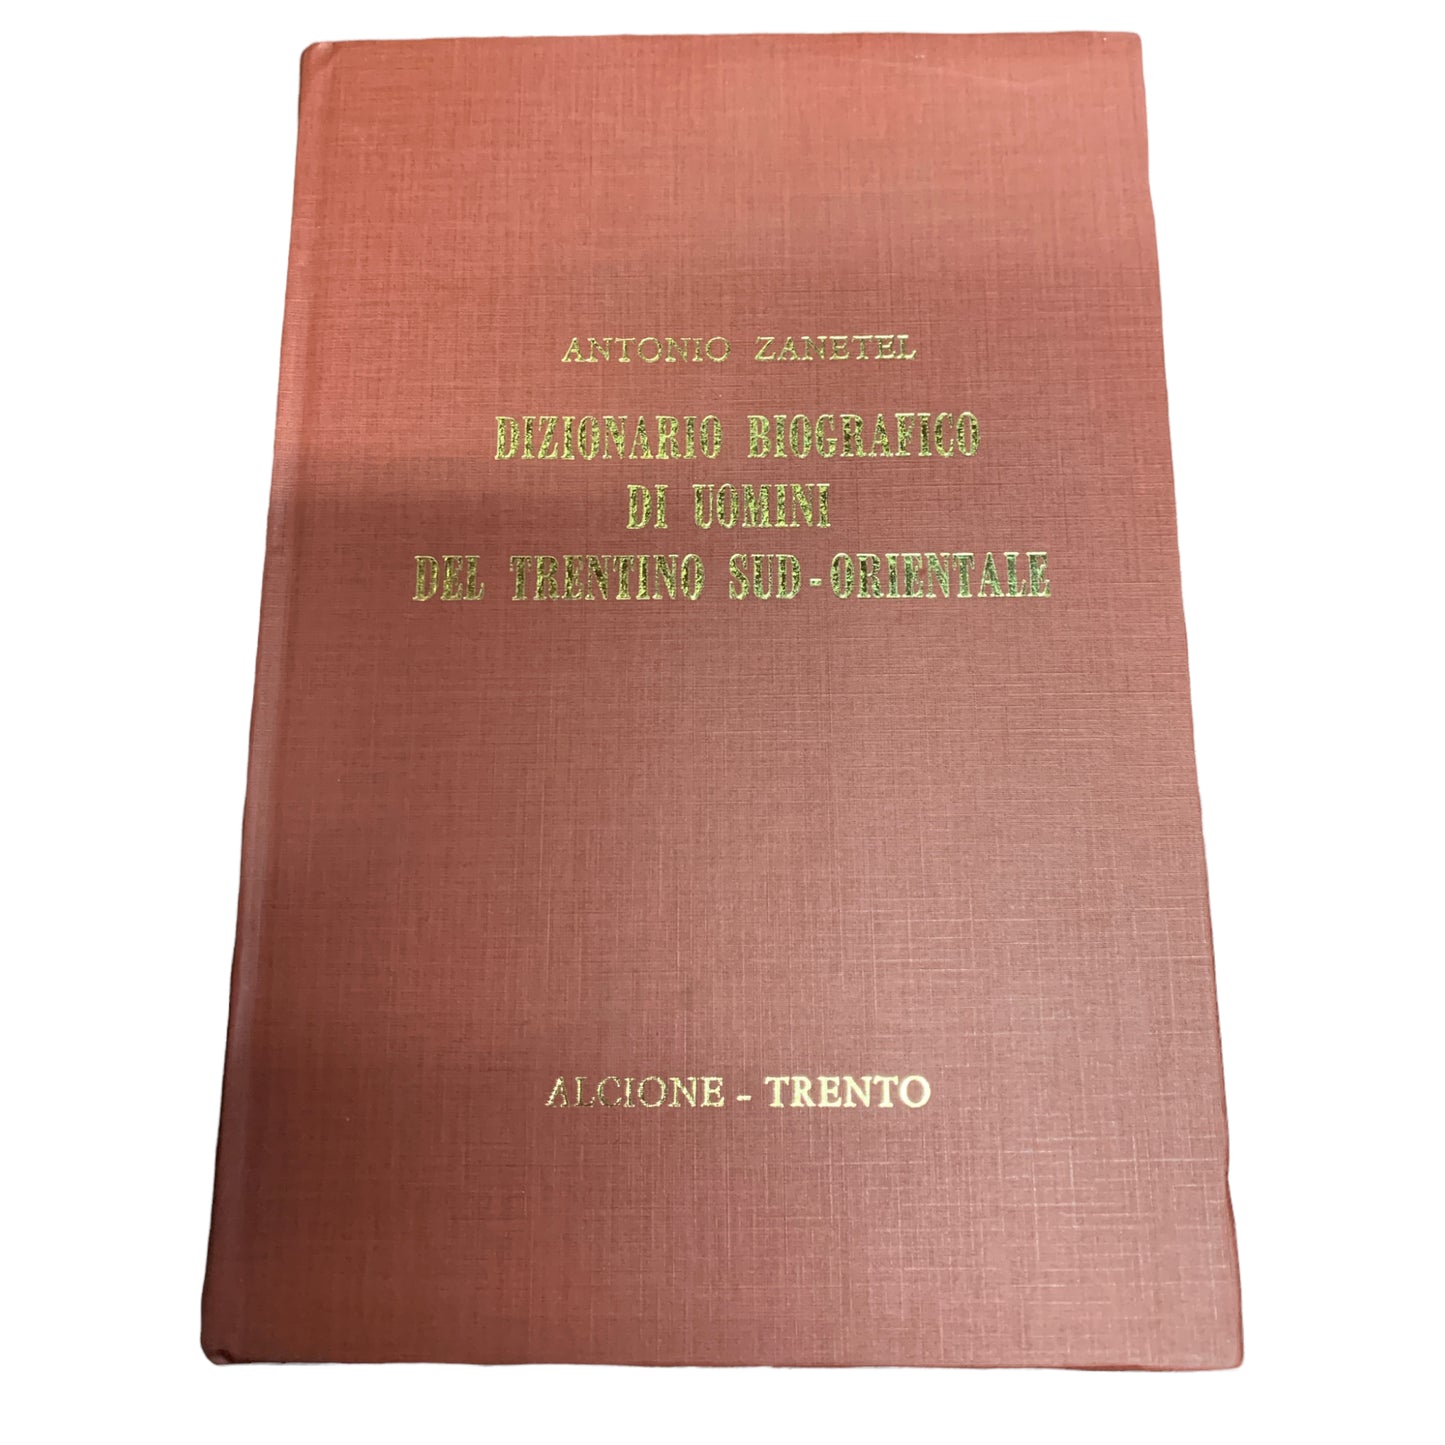 Biographical dictionary of men from south-eastern Trentino - Antonio Zanetel